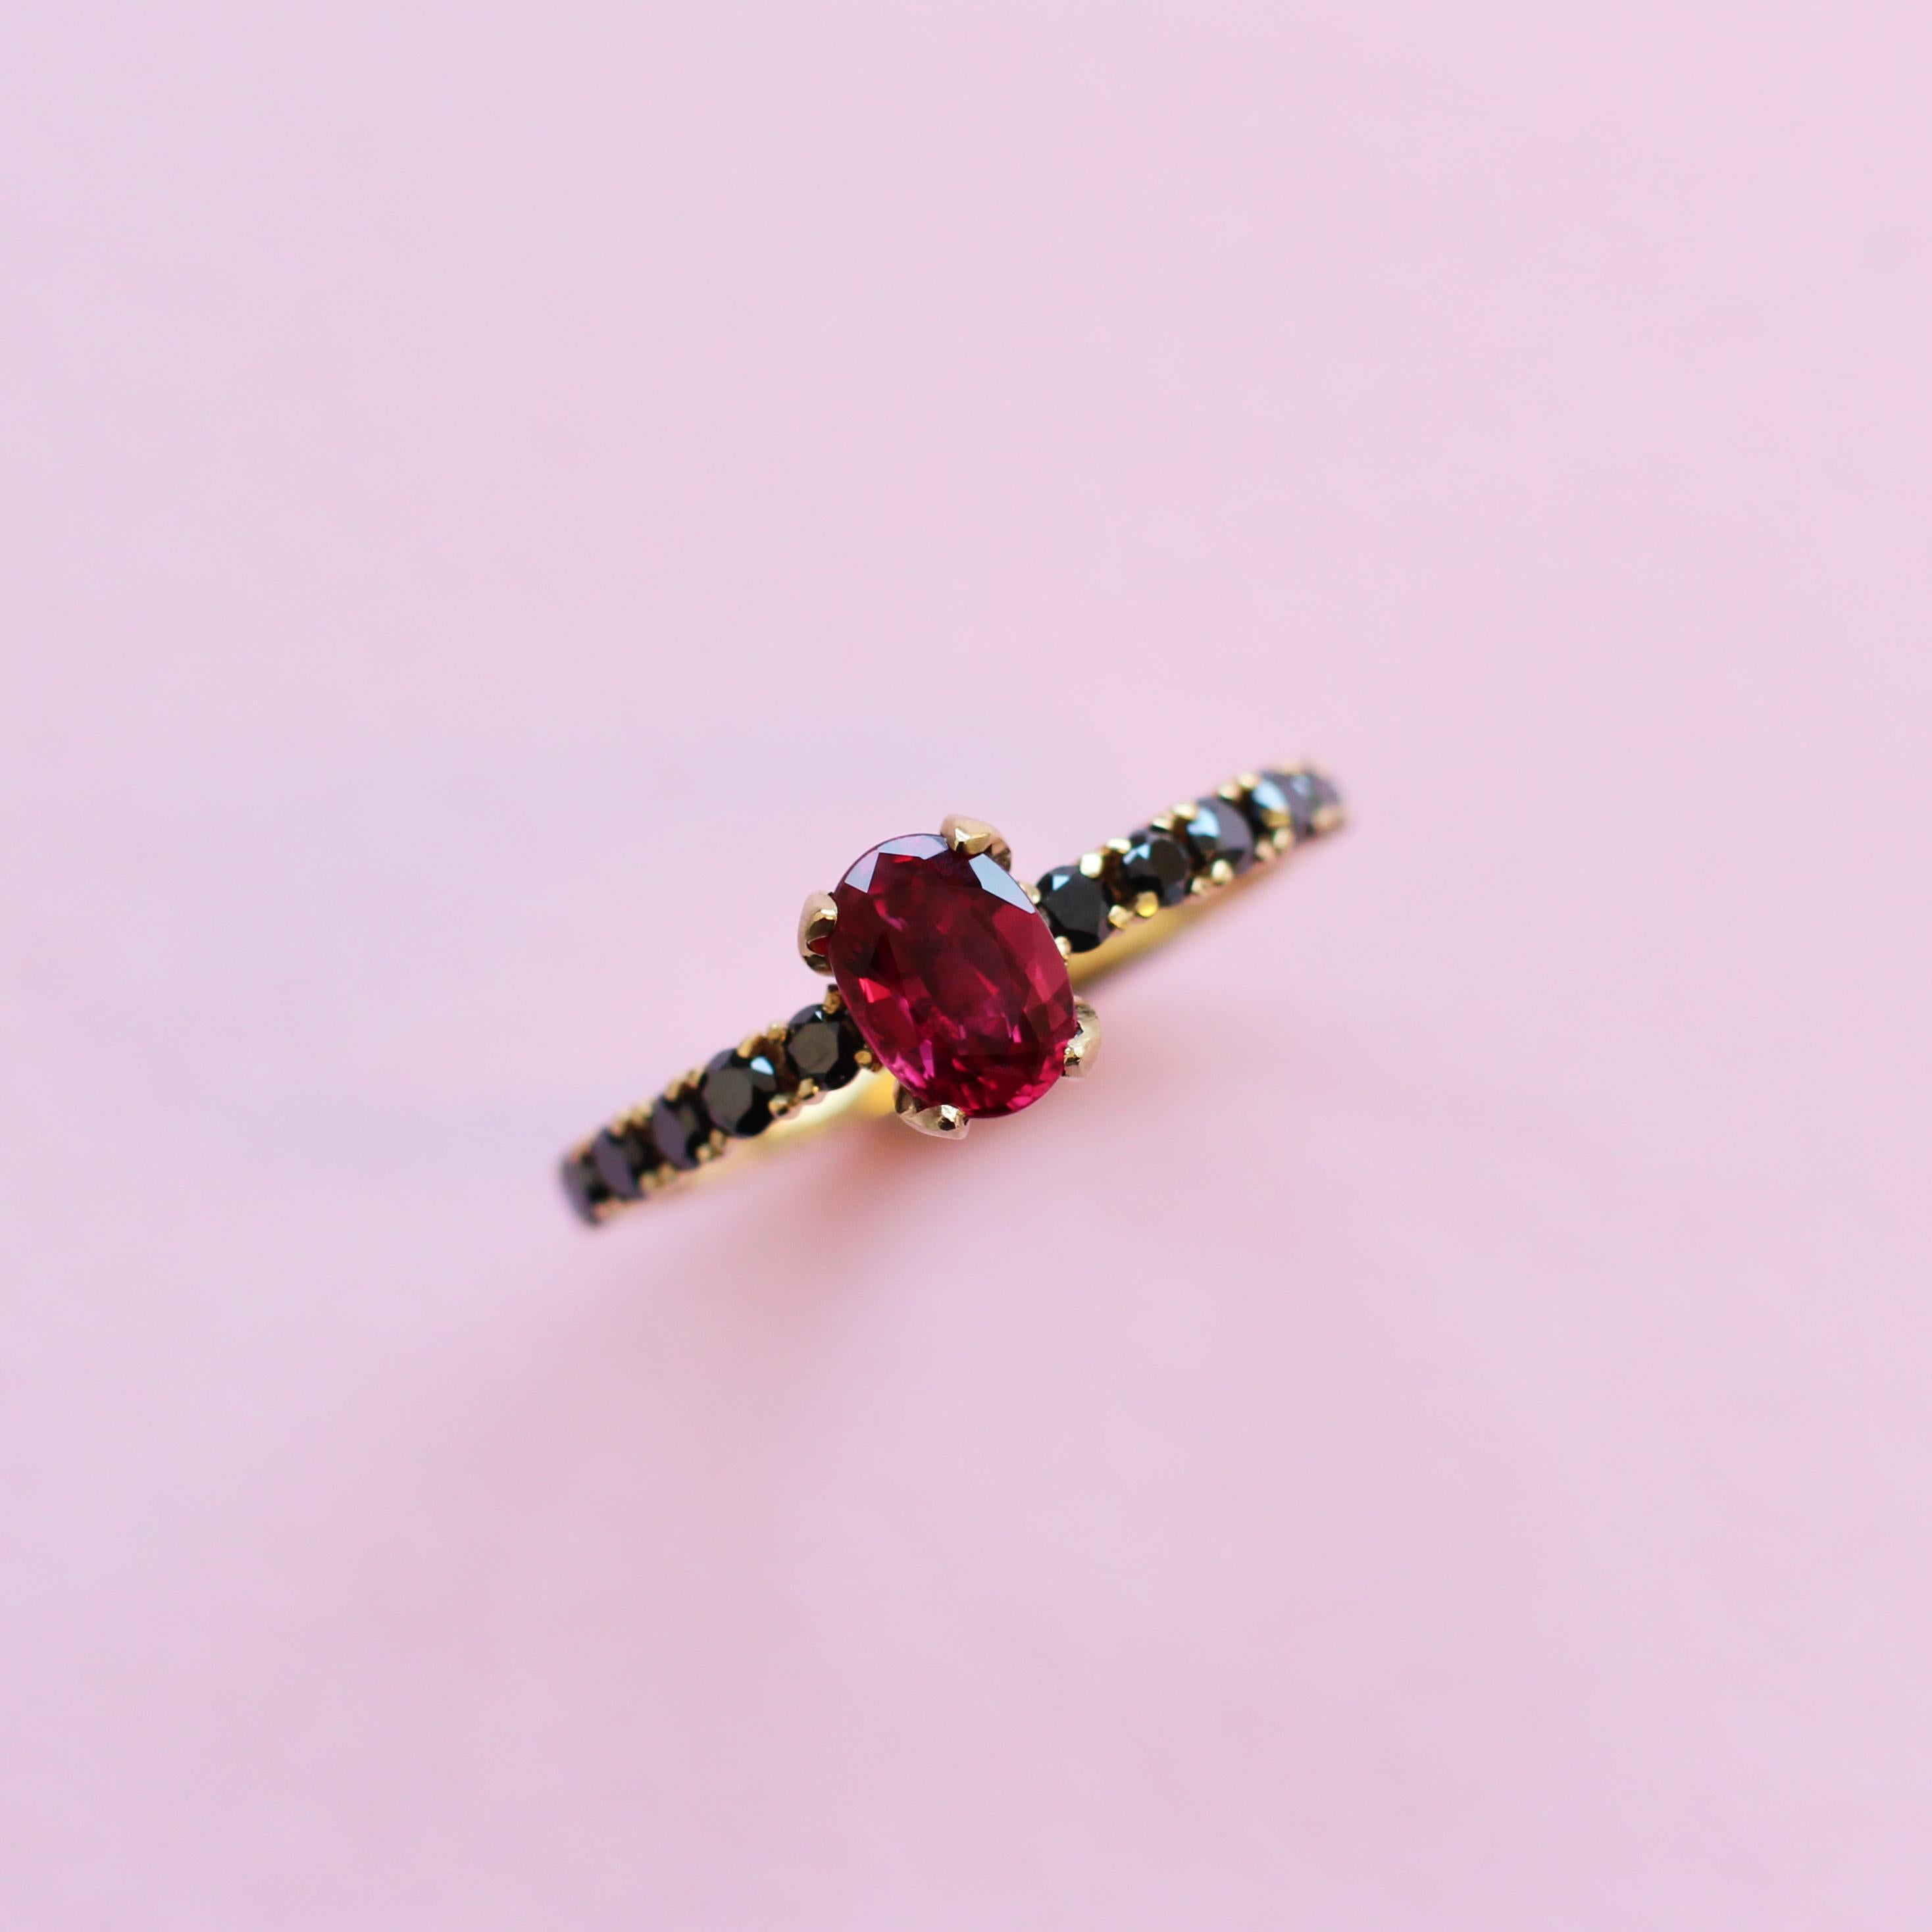 For Sale:  1 Carat Ruby and Black Diamond Solitaire Ring Set in 18 Karat Yellow Gold 5